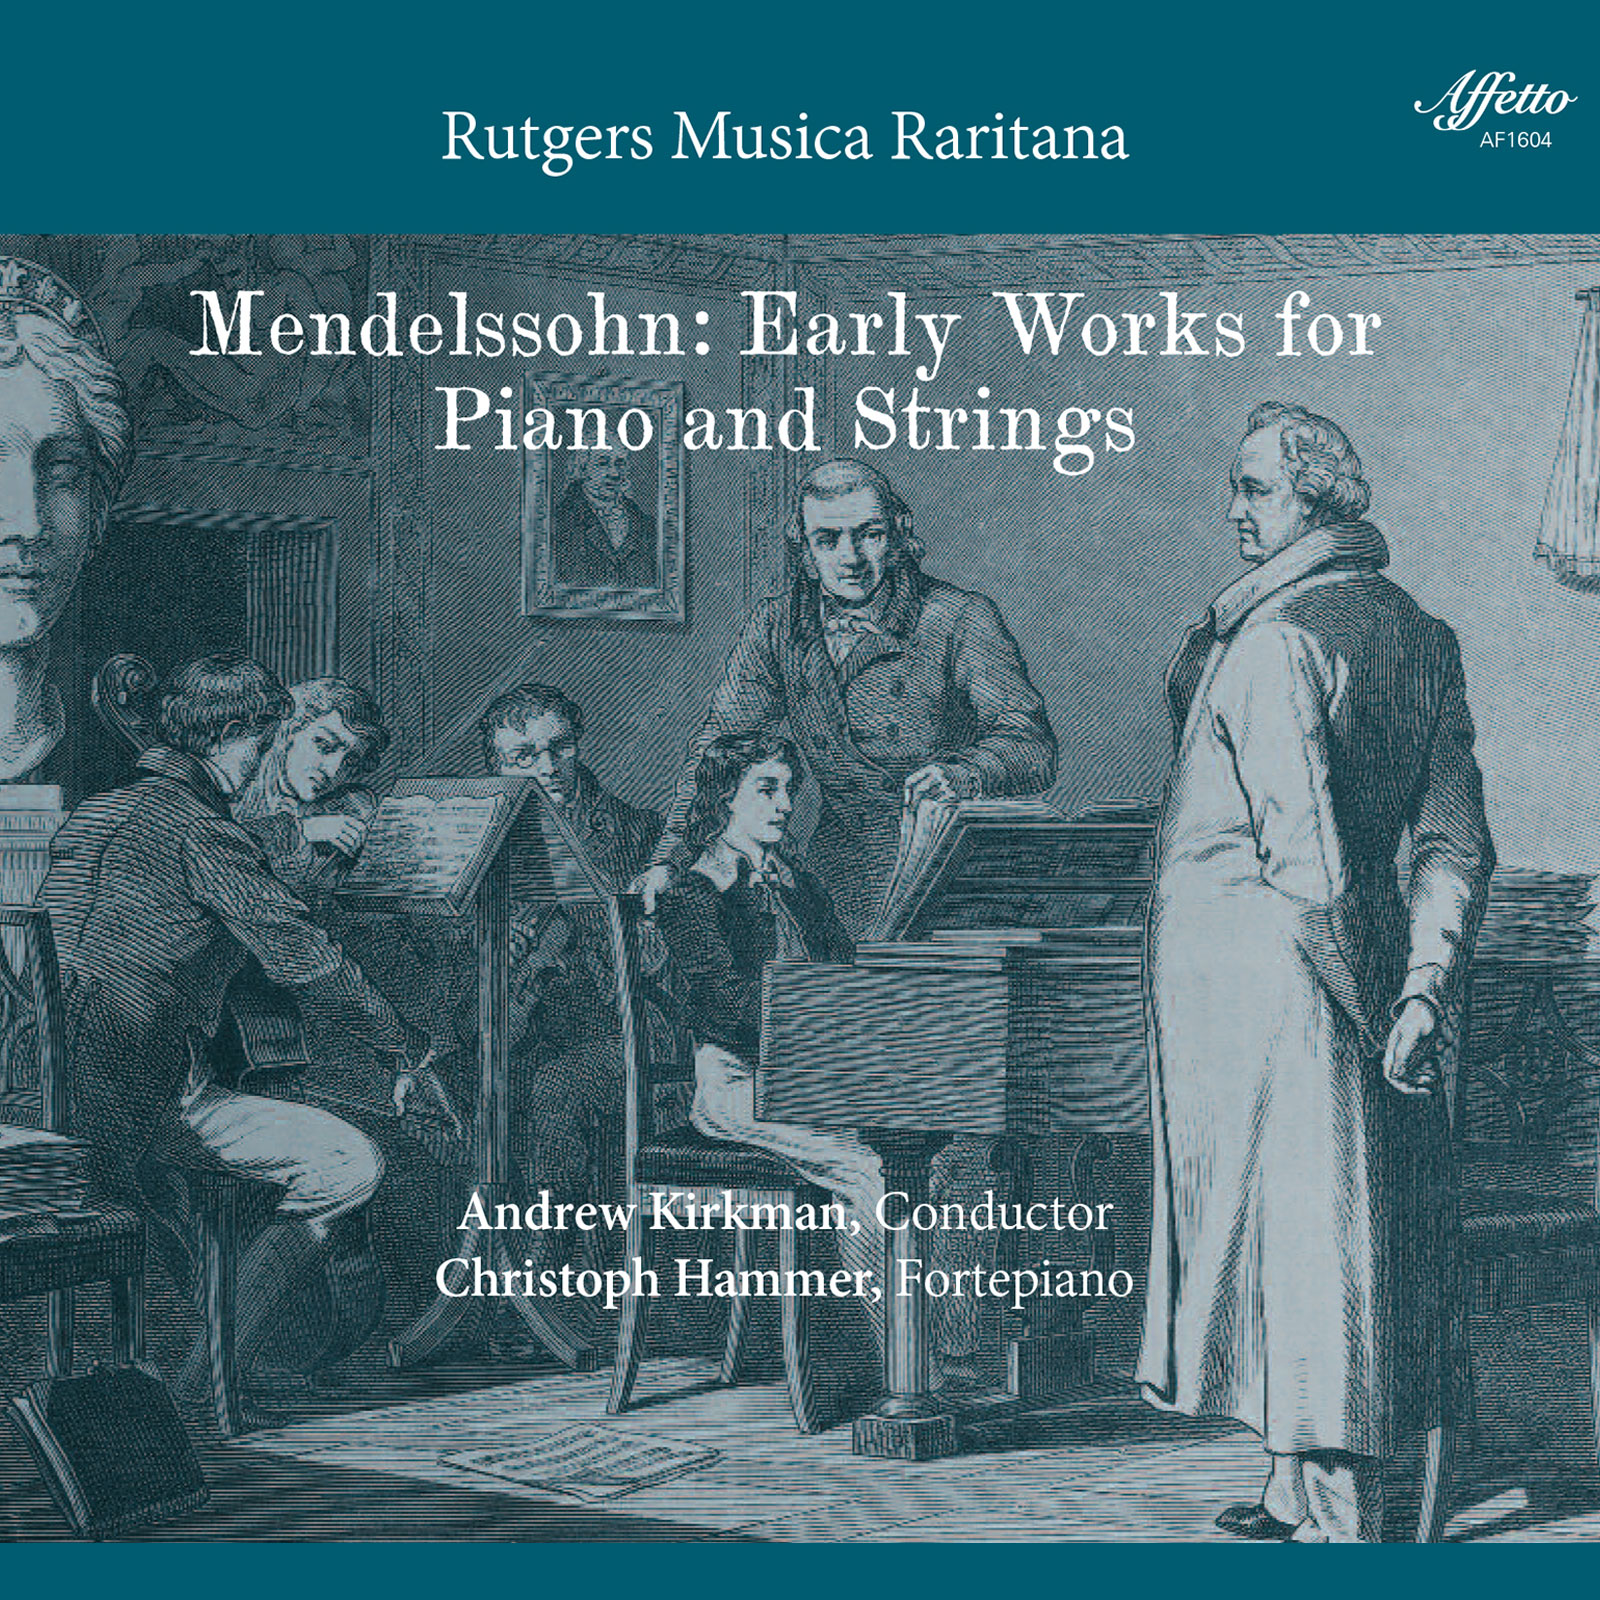 MENDELSSOHN: Early Works for Piano and Strings